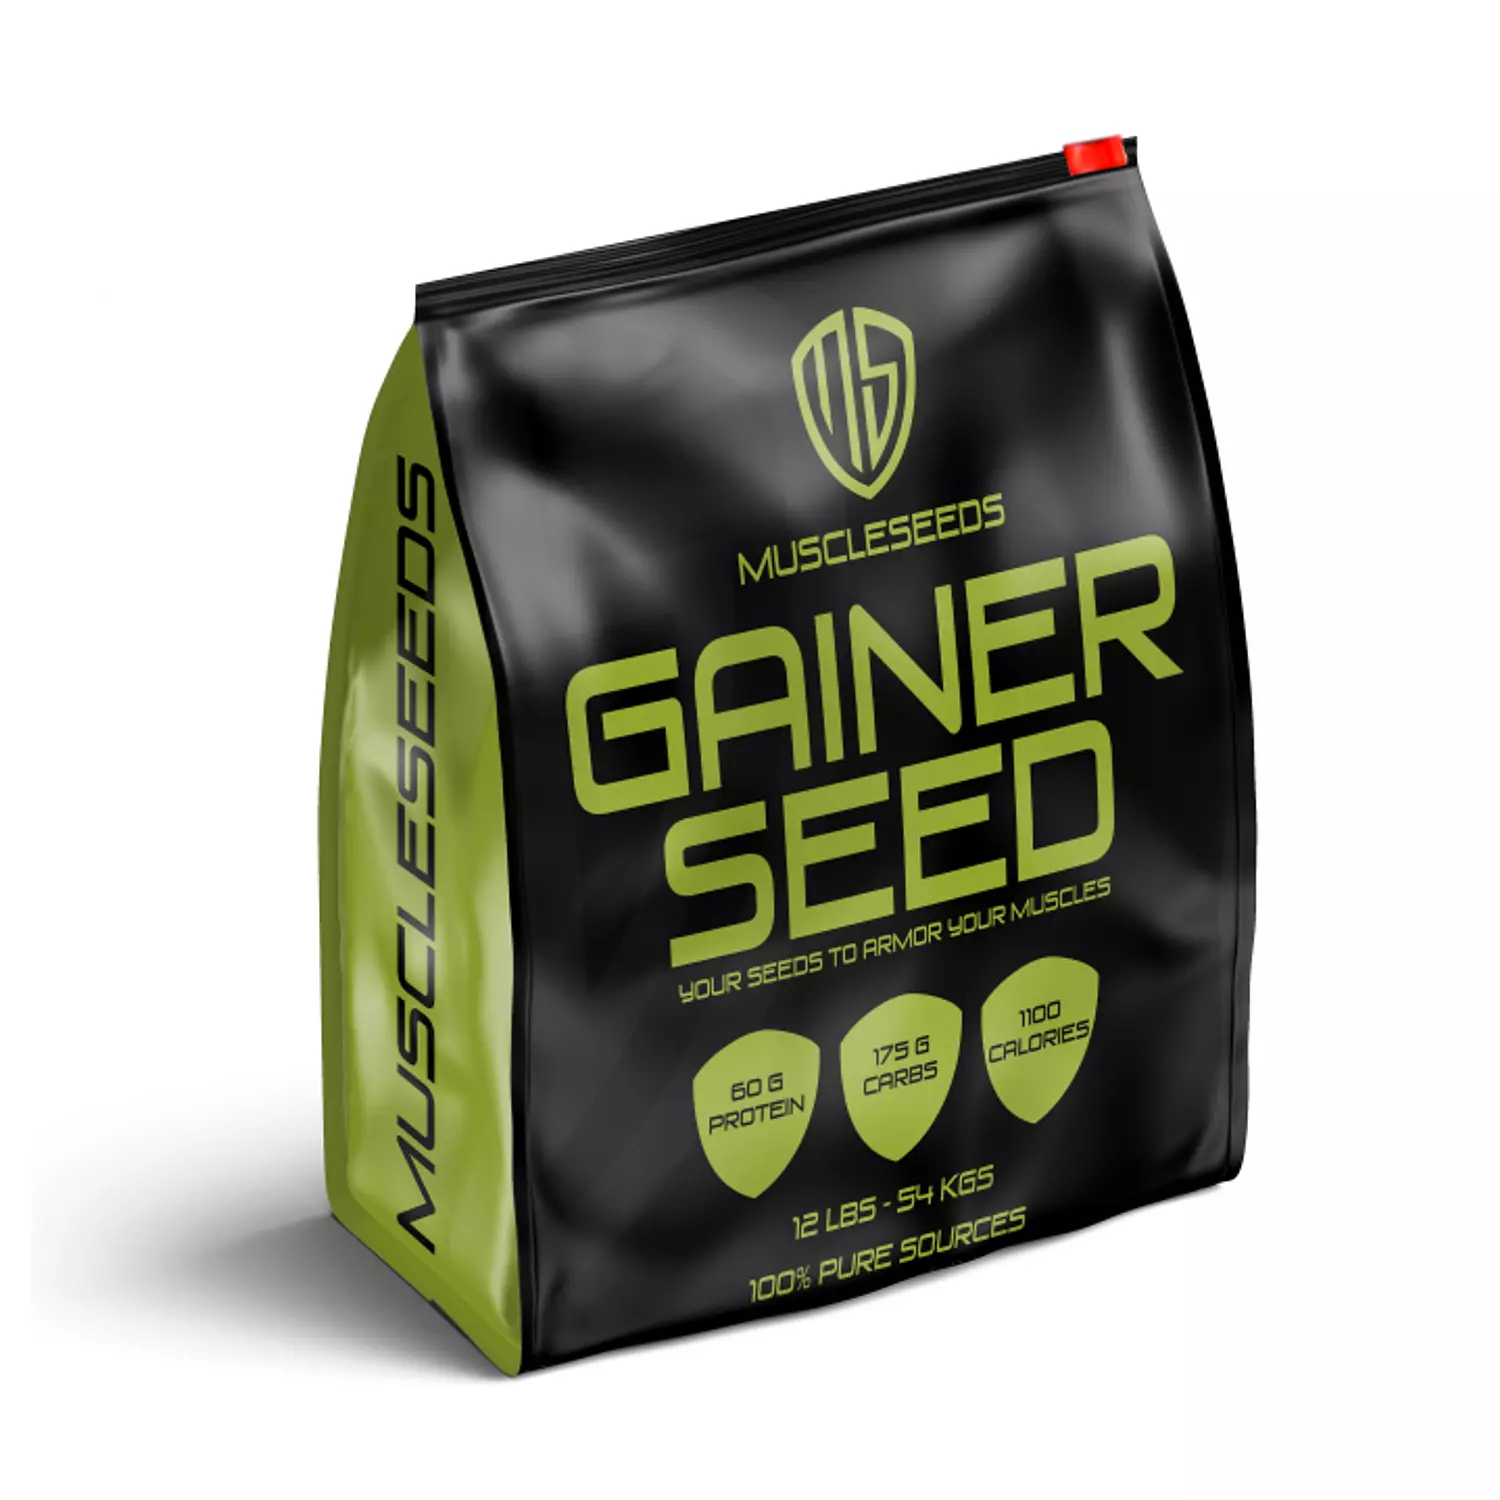 Gainer Seed  hover image